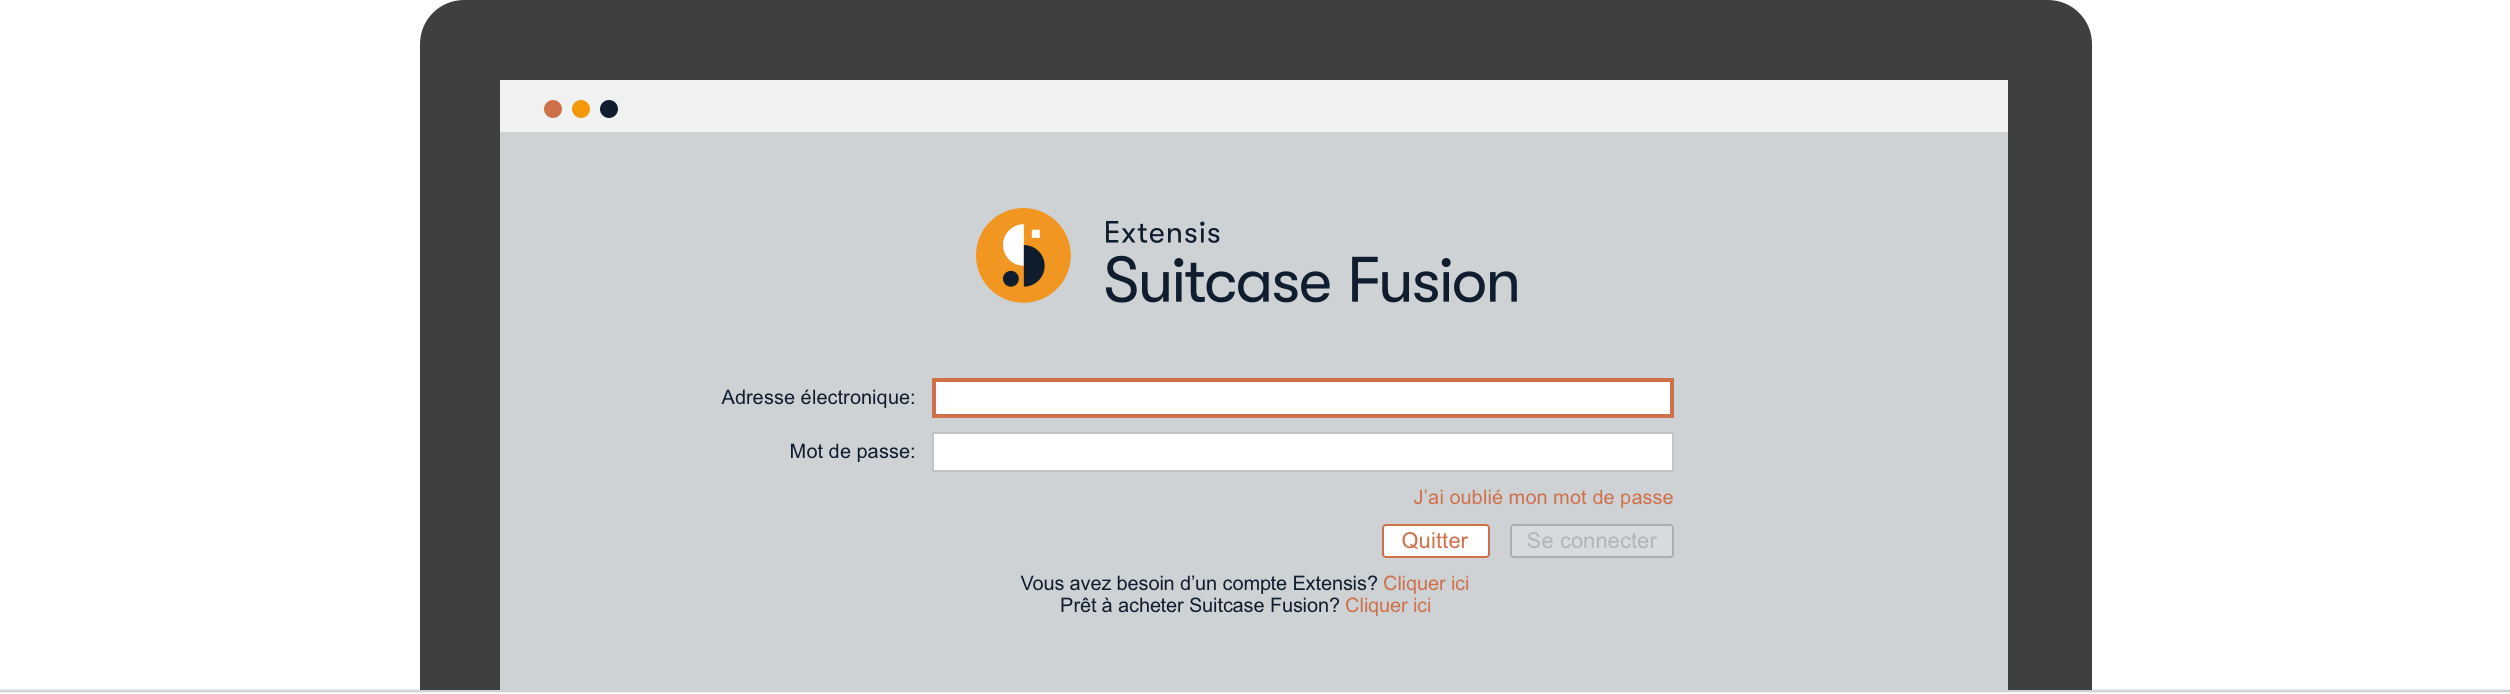 extensis suitcase fusion 8 upgrade code